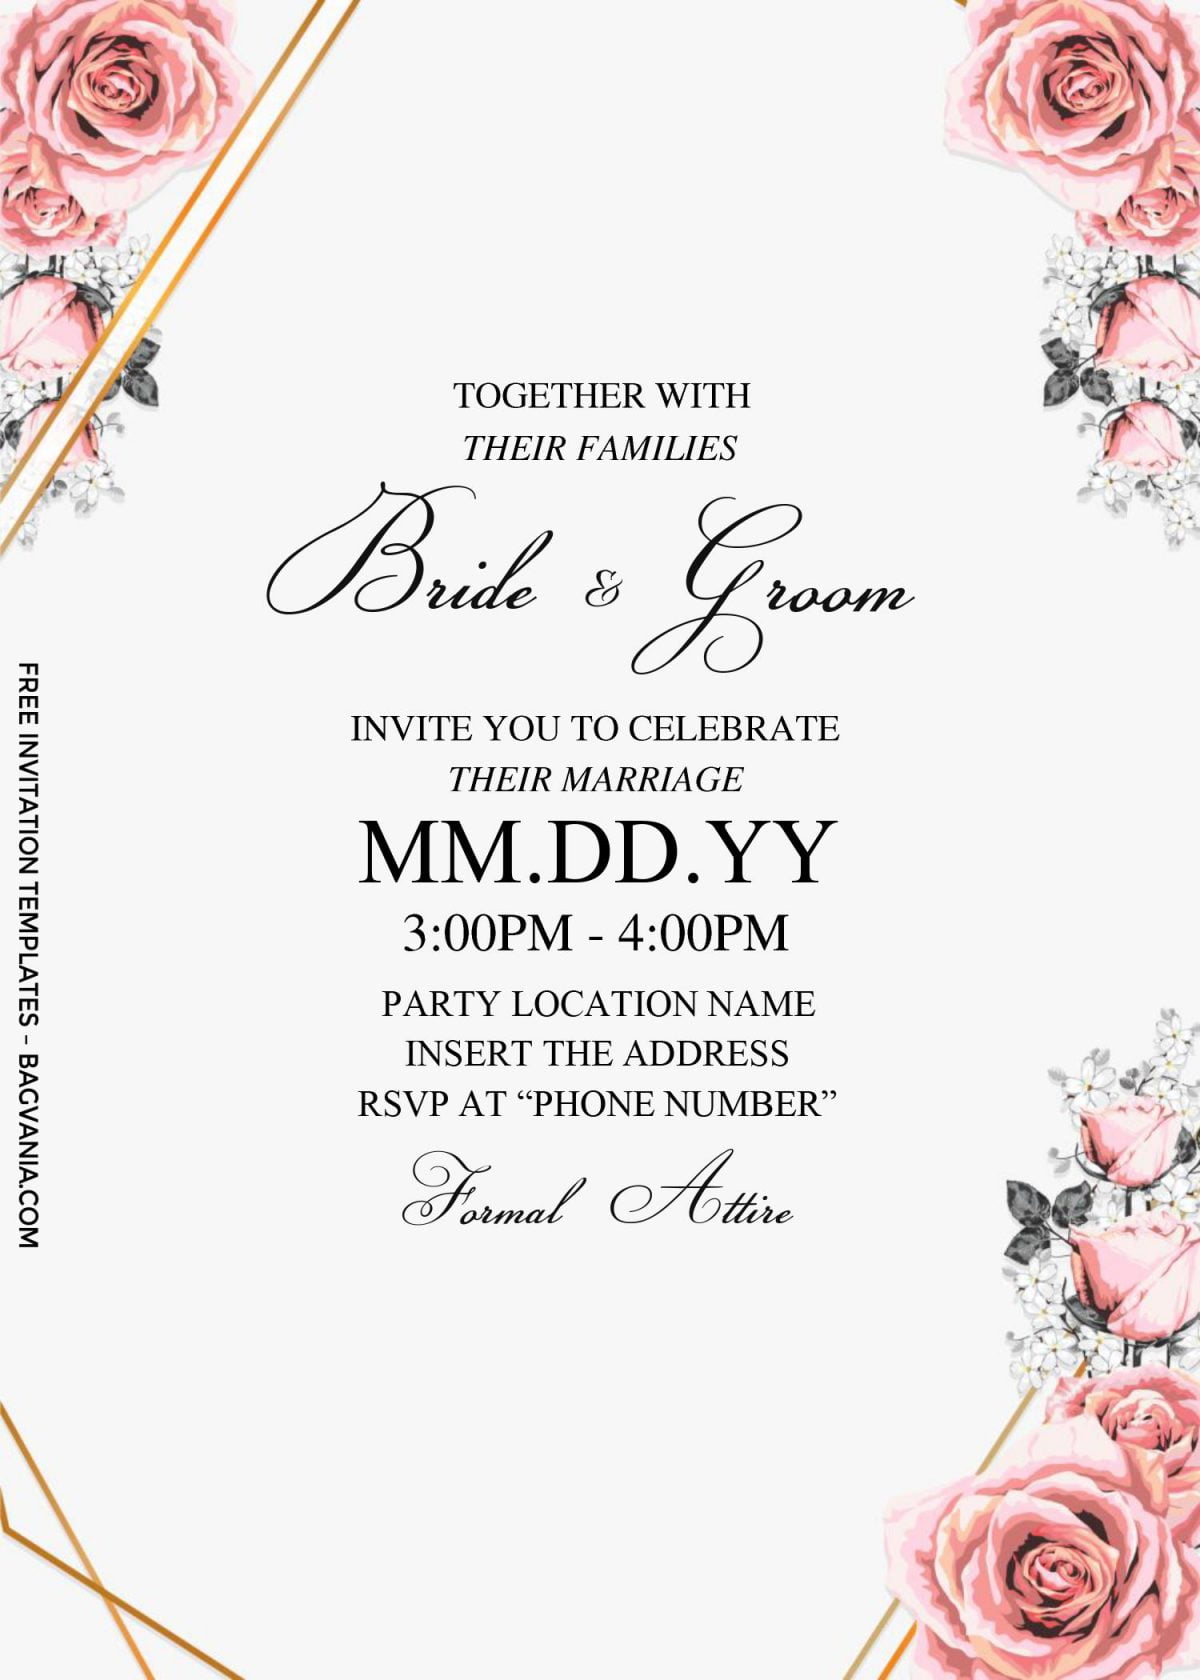 Free Dusty Rose Wedding Invitation Templates For Word